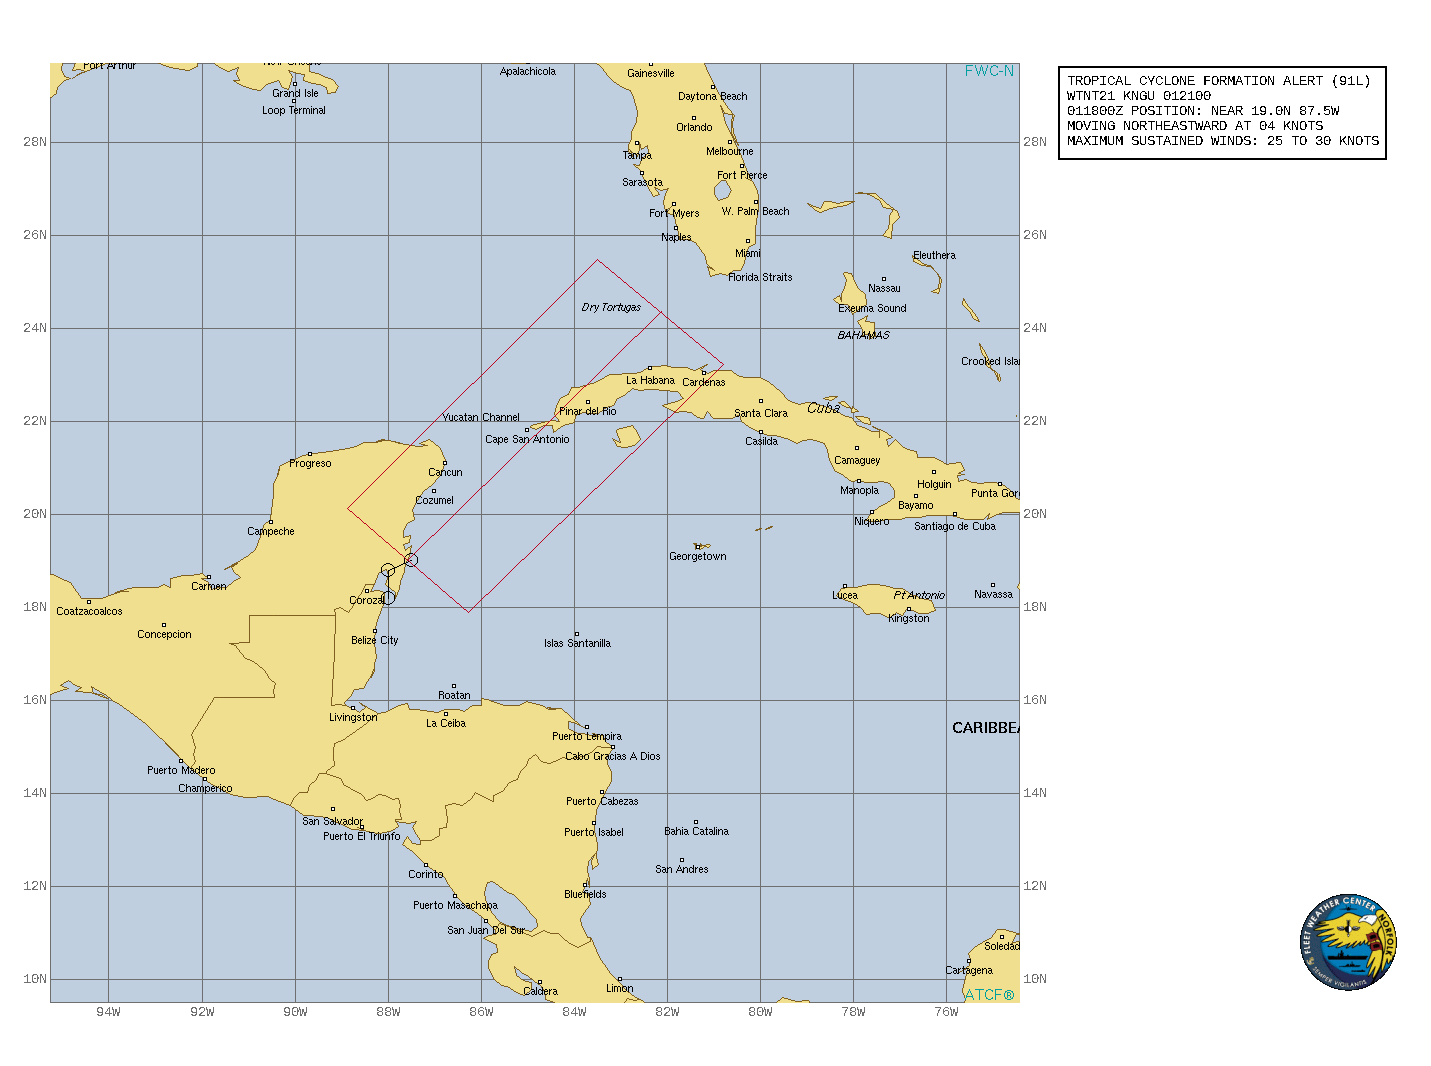 WTNT21 KNGU 012100 SUBJ/TROPICAL CYCLONE FORMATION ALERT (91L)// RMKS/ 1. FORMATION OF A TROPICAL CYCLONE IS POSSIBLE WITHIN 185 KM  EITHER SIDE OF A LINE FROM 19.0N 87.6W TO 24.4N 82.1W WITHIN THE NEXT 24 HOURS. AVAILABLE DATA DOES NOT JUSTIFY ISSUANCE OF NUMBERED TROPICAL CYCLONE WARNINGS AT THIS TIME. WINDS IN THE AREA ARE ESTIMATED TO BE 25 TO 30 KNOTS. METSAT IMAGERY AT 011800Z INDICATES THAT A CIRCULATION CENTER IS LOCATED NEAR 19.0N 87.5W. THE SYSTEM IS MOVING NORTHEASTWARD AT 07 KM/H. 2. THE POTENTIAL FOR THE DEVELOPMENT OF A SIGNIFICANT TROPICAL  CYCLONE WITHIN THE NEXT 24 HOURS IS HIGH. AN ELONGATED (WEST TO  EAST) AREA OF LOW PRESSURE, LOCATED NEAR THE EAST COAST OF THE  YUCATAN PENINSULA, IS PRODUCING A LARGE AREA OF DISORGANIZED  SHOWERS AND THUNDERSTORMS OVER THE NORTHWESTERN CARRIBBEAN SEA AND  THE YUCATAN CHANNEL. SUSTAINED EASTERLY WINDS OF 25-30 KTS RESIDE IN THE NORTHEASTERN PERIPHERY OF THE BROAD SURFACE CIRCULATION. ALTHOUGH STRONG UPPER-LEVEL WINDS ARE FORECAST TO INHIBIT SIGNIFICANT DEVELOPMENT, A TROPICAL DEPRESSION IS LIKELY TO FORM DURING THE NEXT 24 HOURS WHILE IT MOVES NORTHEASTWARD OVER THE YUCATAN CHANNEL AND INTO THE SOUTHEASTERN GULF OF MEXICO. 3.THIS ALERT WILL BE REISSUED, UPGRADED TO WARNING OR CANCELLED BY  022100Z.//